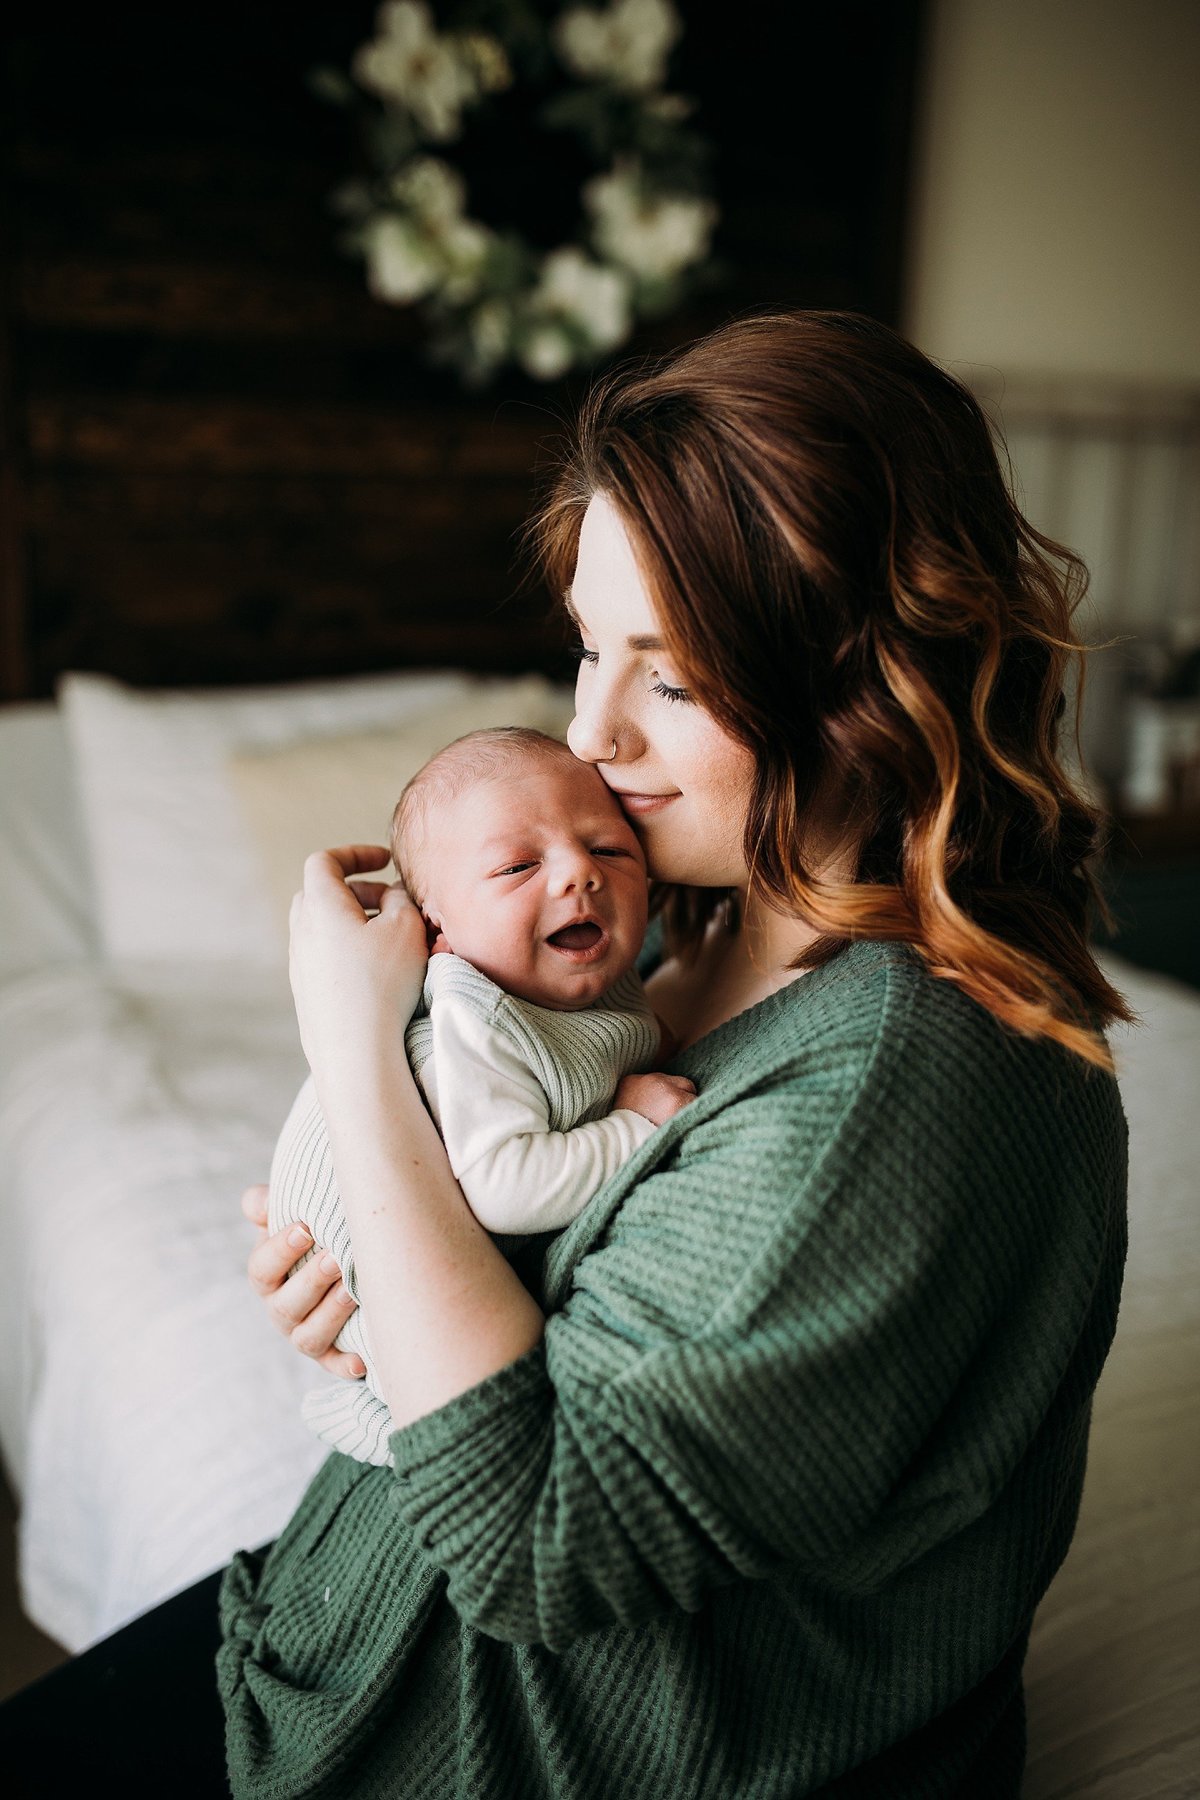 neutral-lifestyle-newborn-session-dover-delaware-rebecca-renner-photography_0018